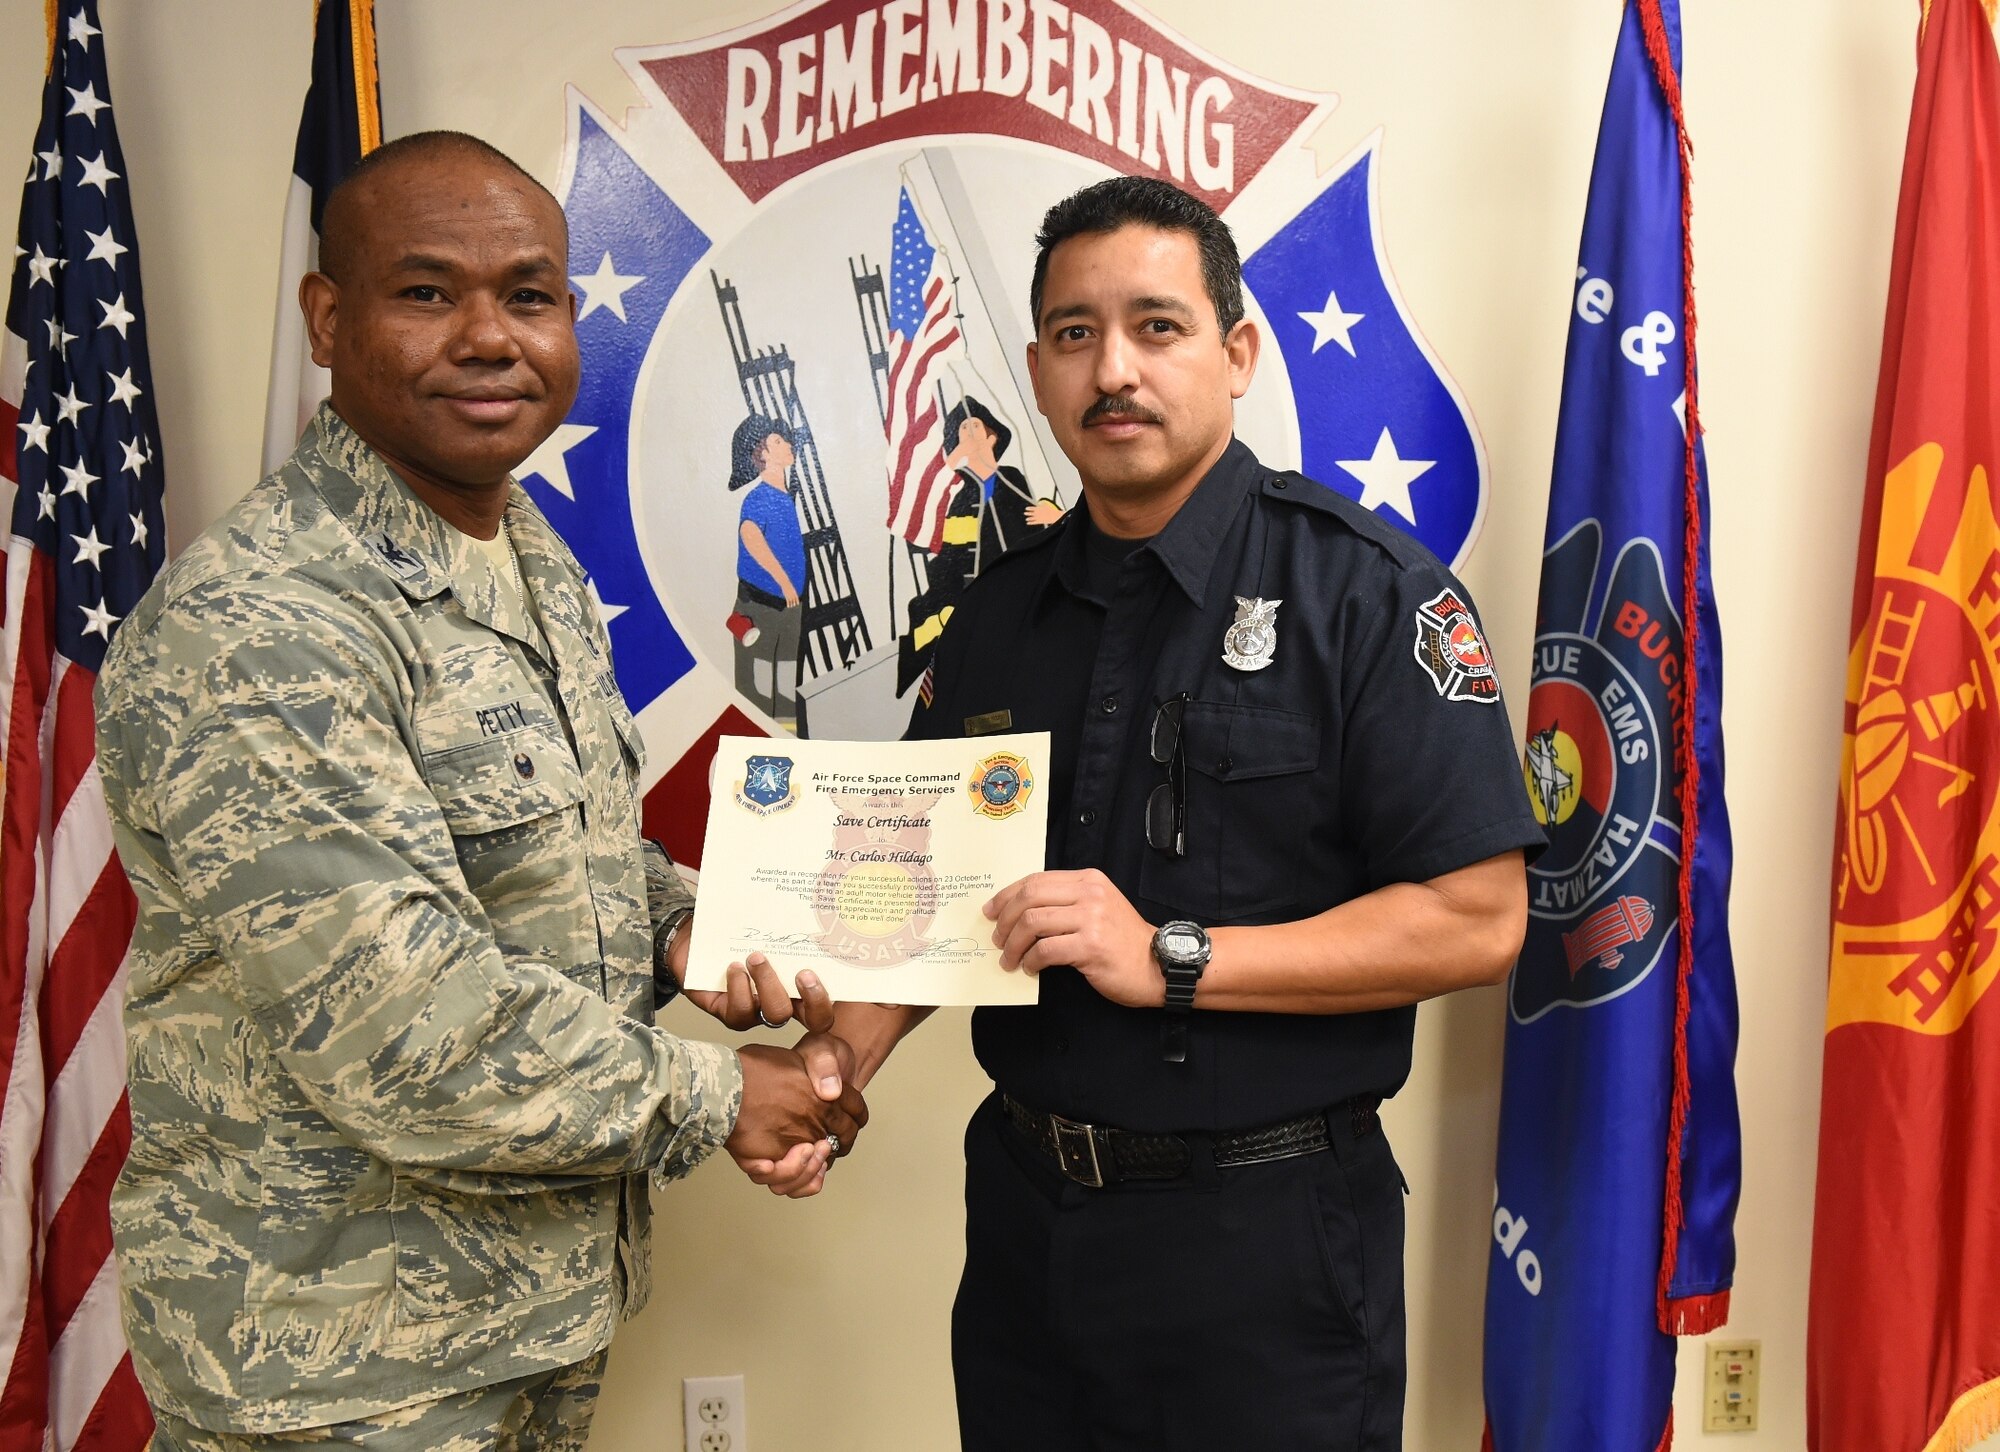 Carlos Hidalgo, Buckley Fire Emergency Services, receives an Air Force Space Command Fire Emergency Services Save Certificate from Col. George Petty, AFSPC Civil Engineer Readiness and Emergency Management chief, Nov. 20, 2014, at the fire department on Buckley Air Force Base, Colo. Hidalgo and three other firefighters were awarded for their lifesaving actions while responding to a major vehicle accident in October 2014. (U.S. Air Force photo by Tech. Sgt. Kali L. Gradishar/Released)